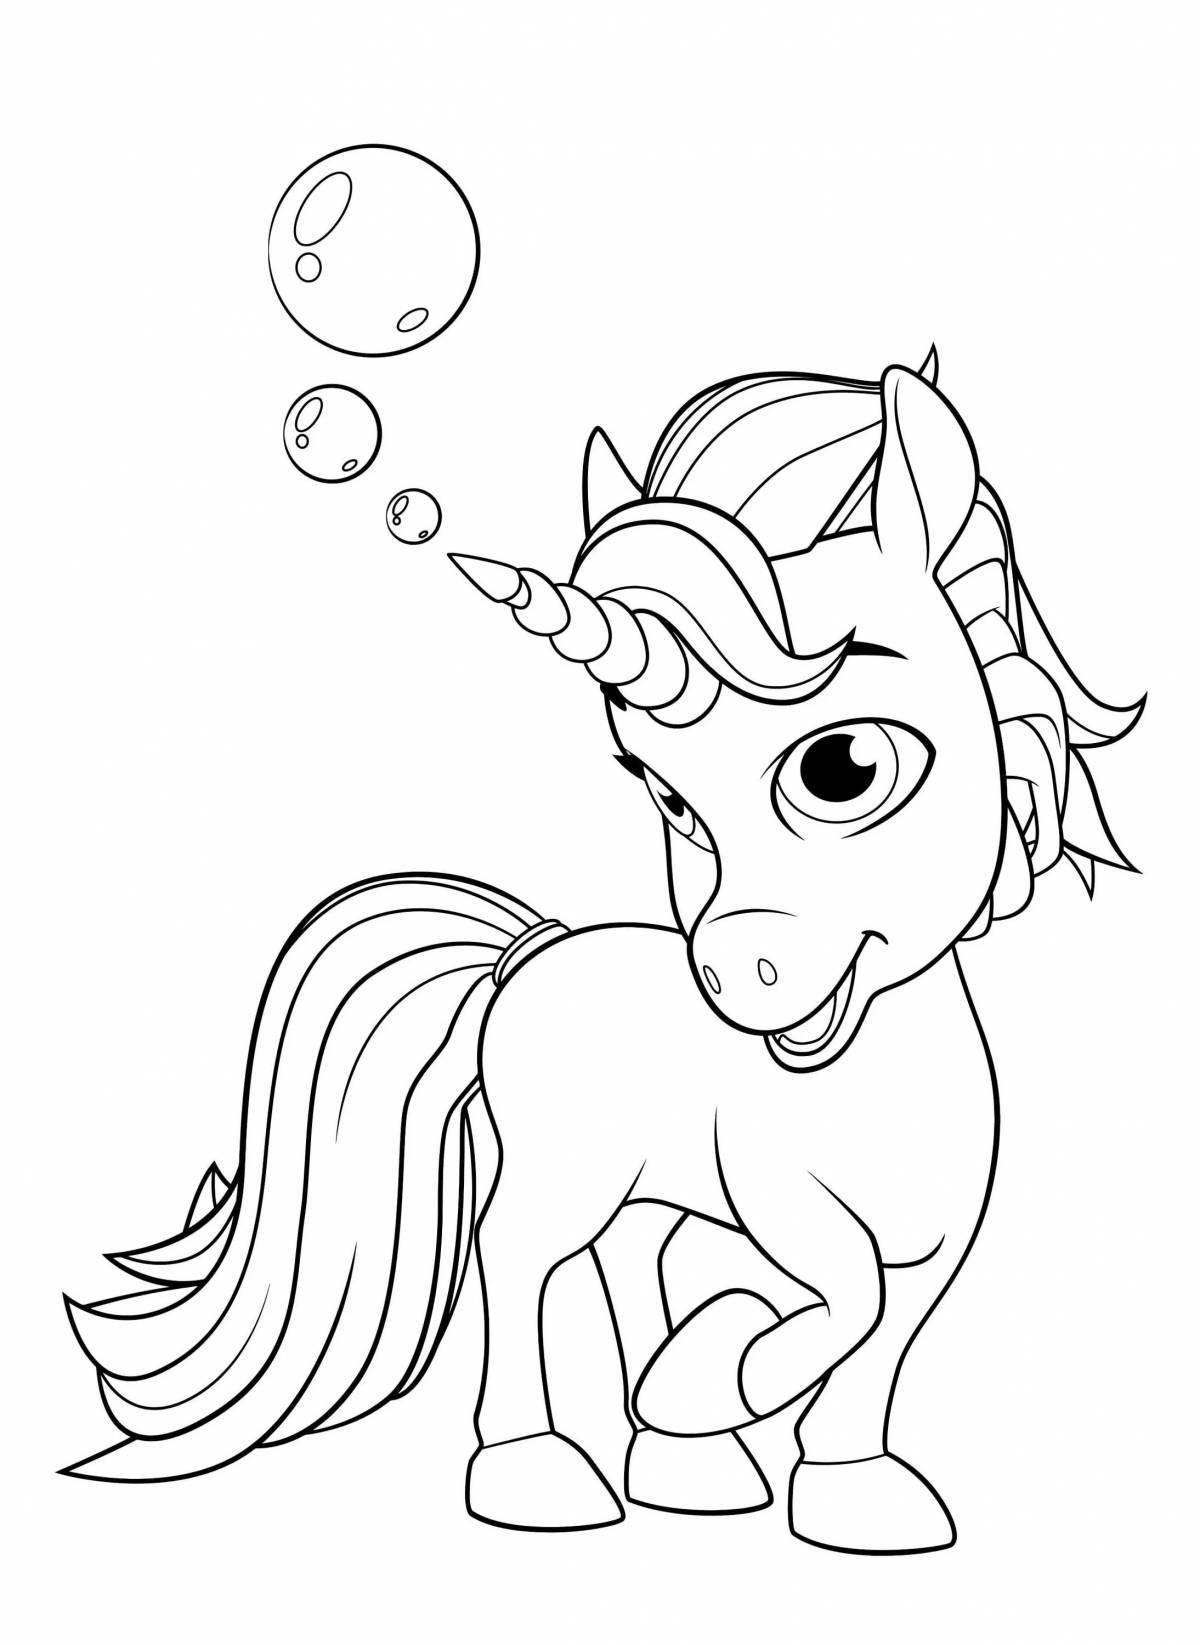 Glorious rainbow horns coloring page